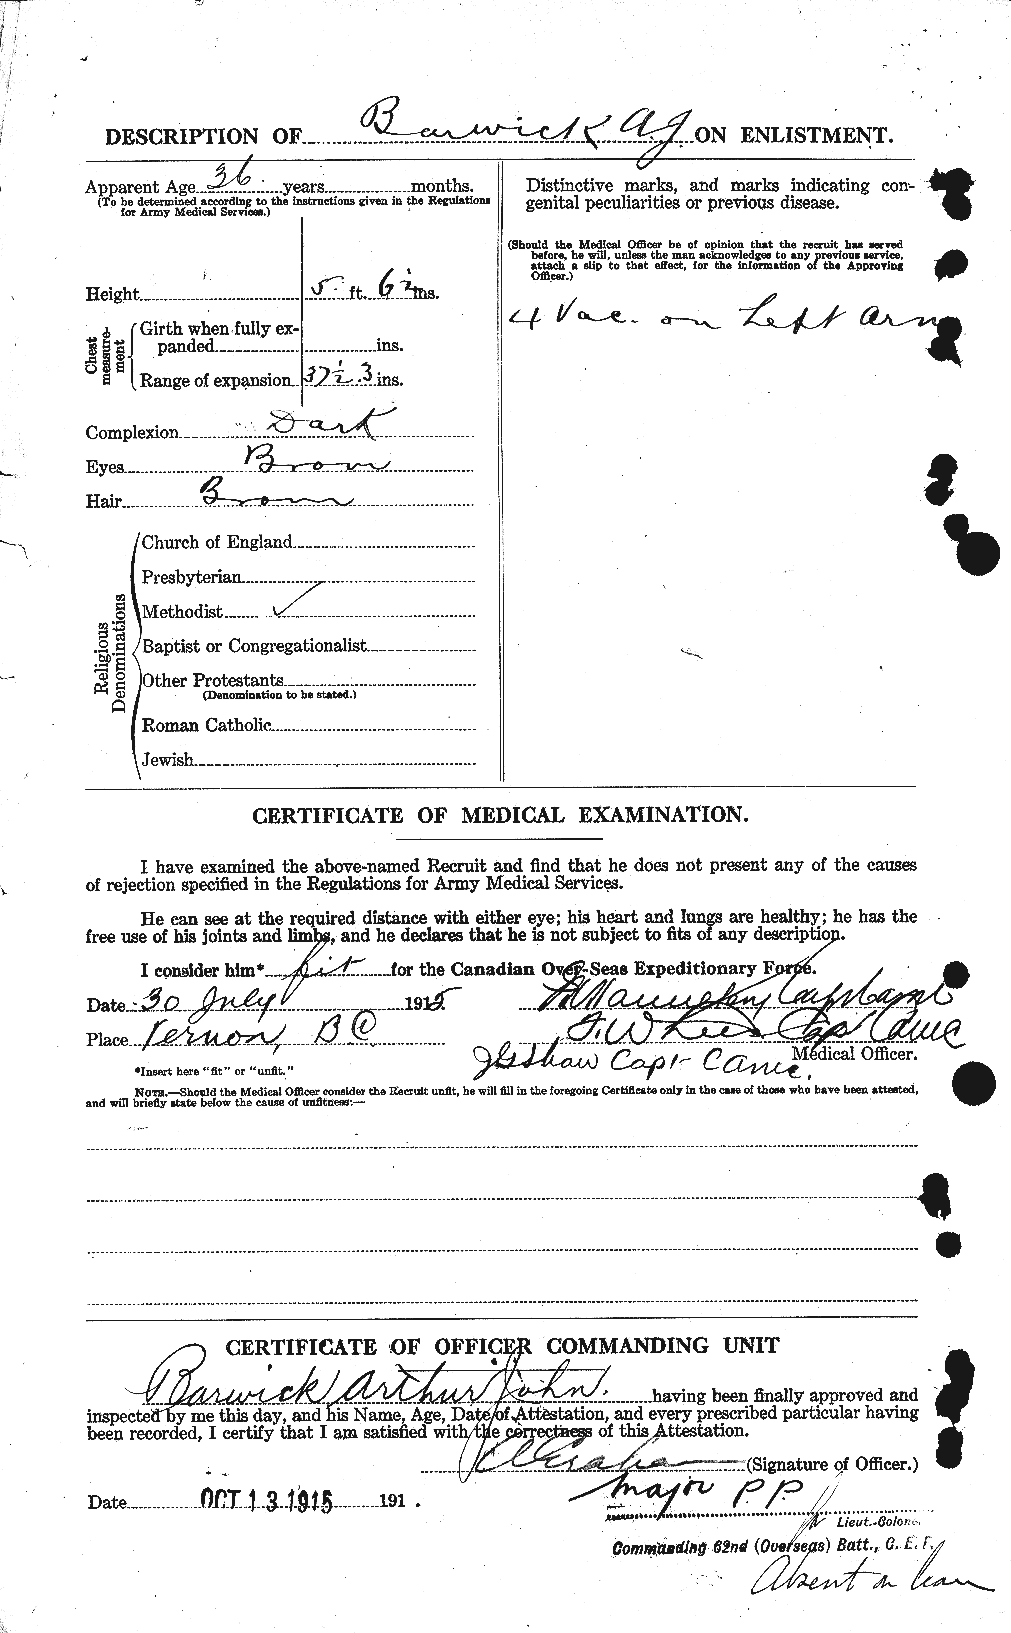 Personnel Records of the First World War - CEF 222002b